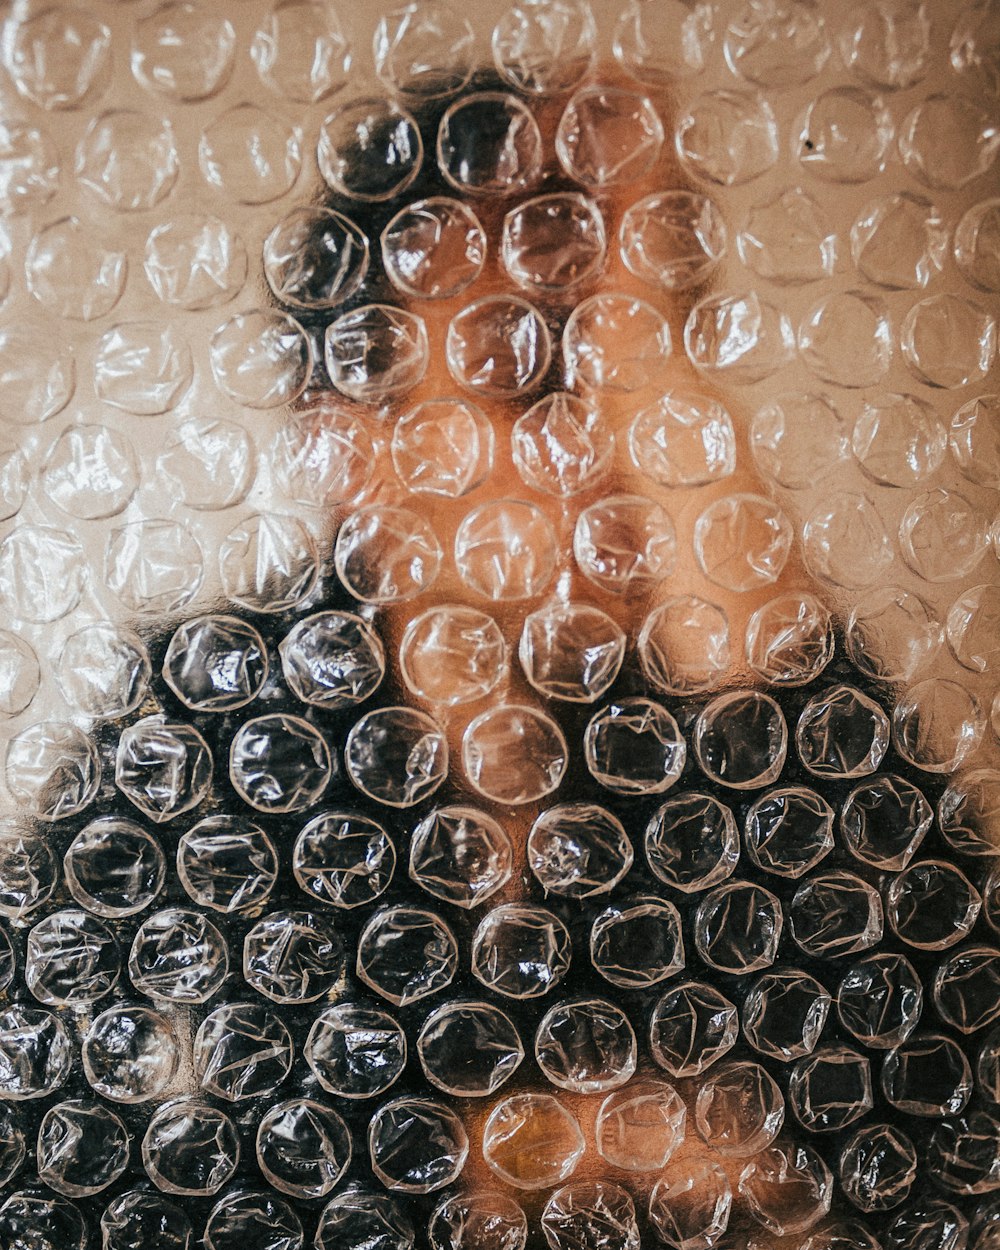 a woman's face is covered in bubbles of water